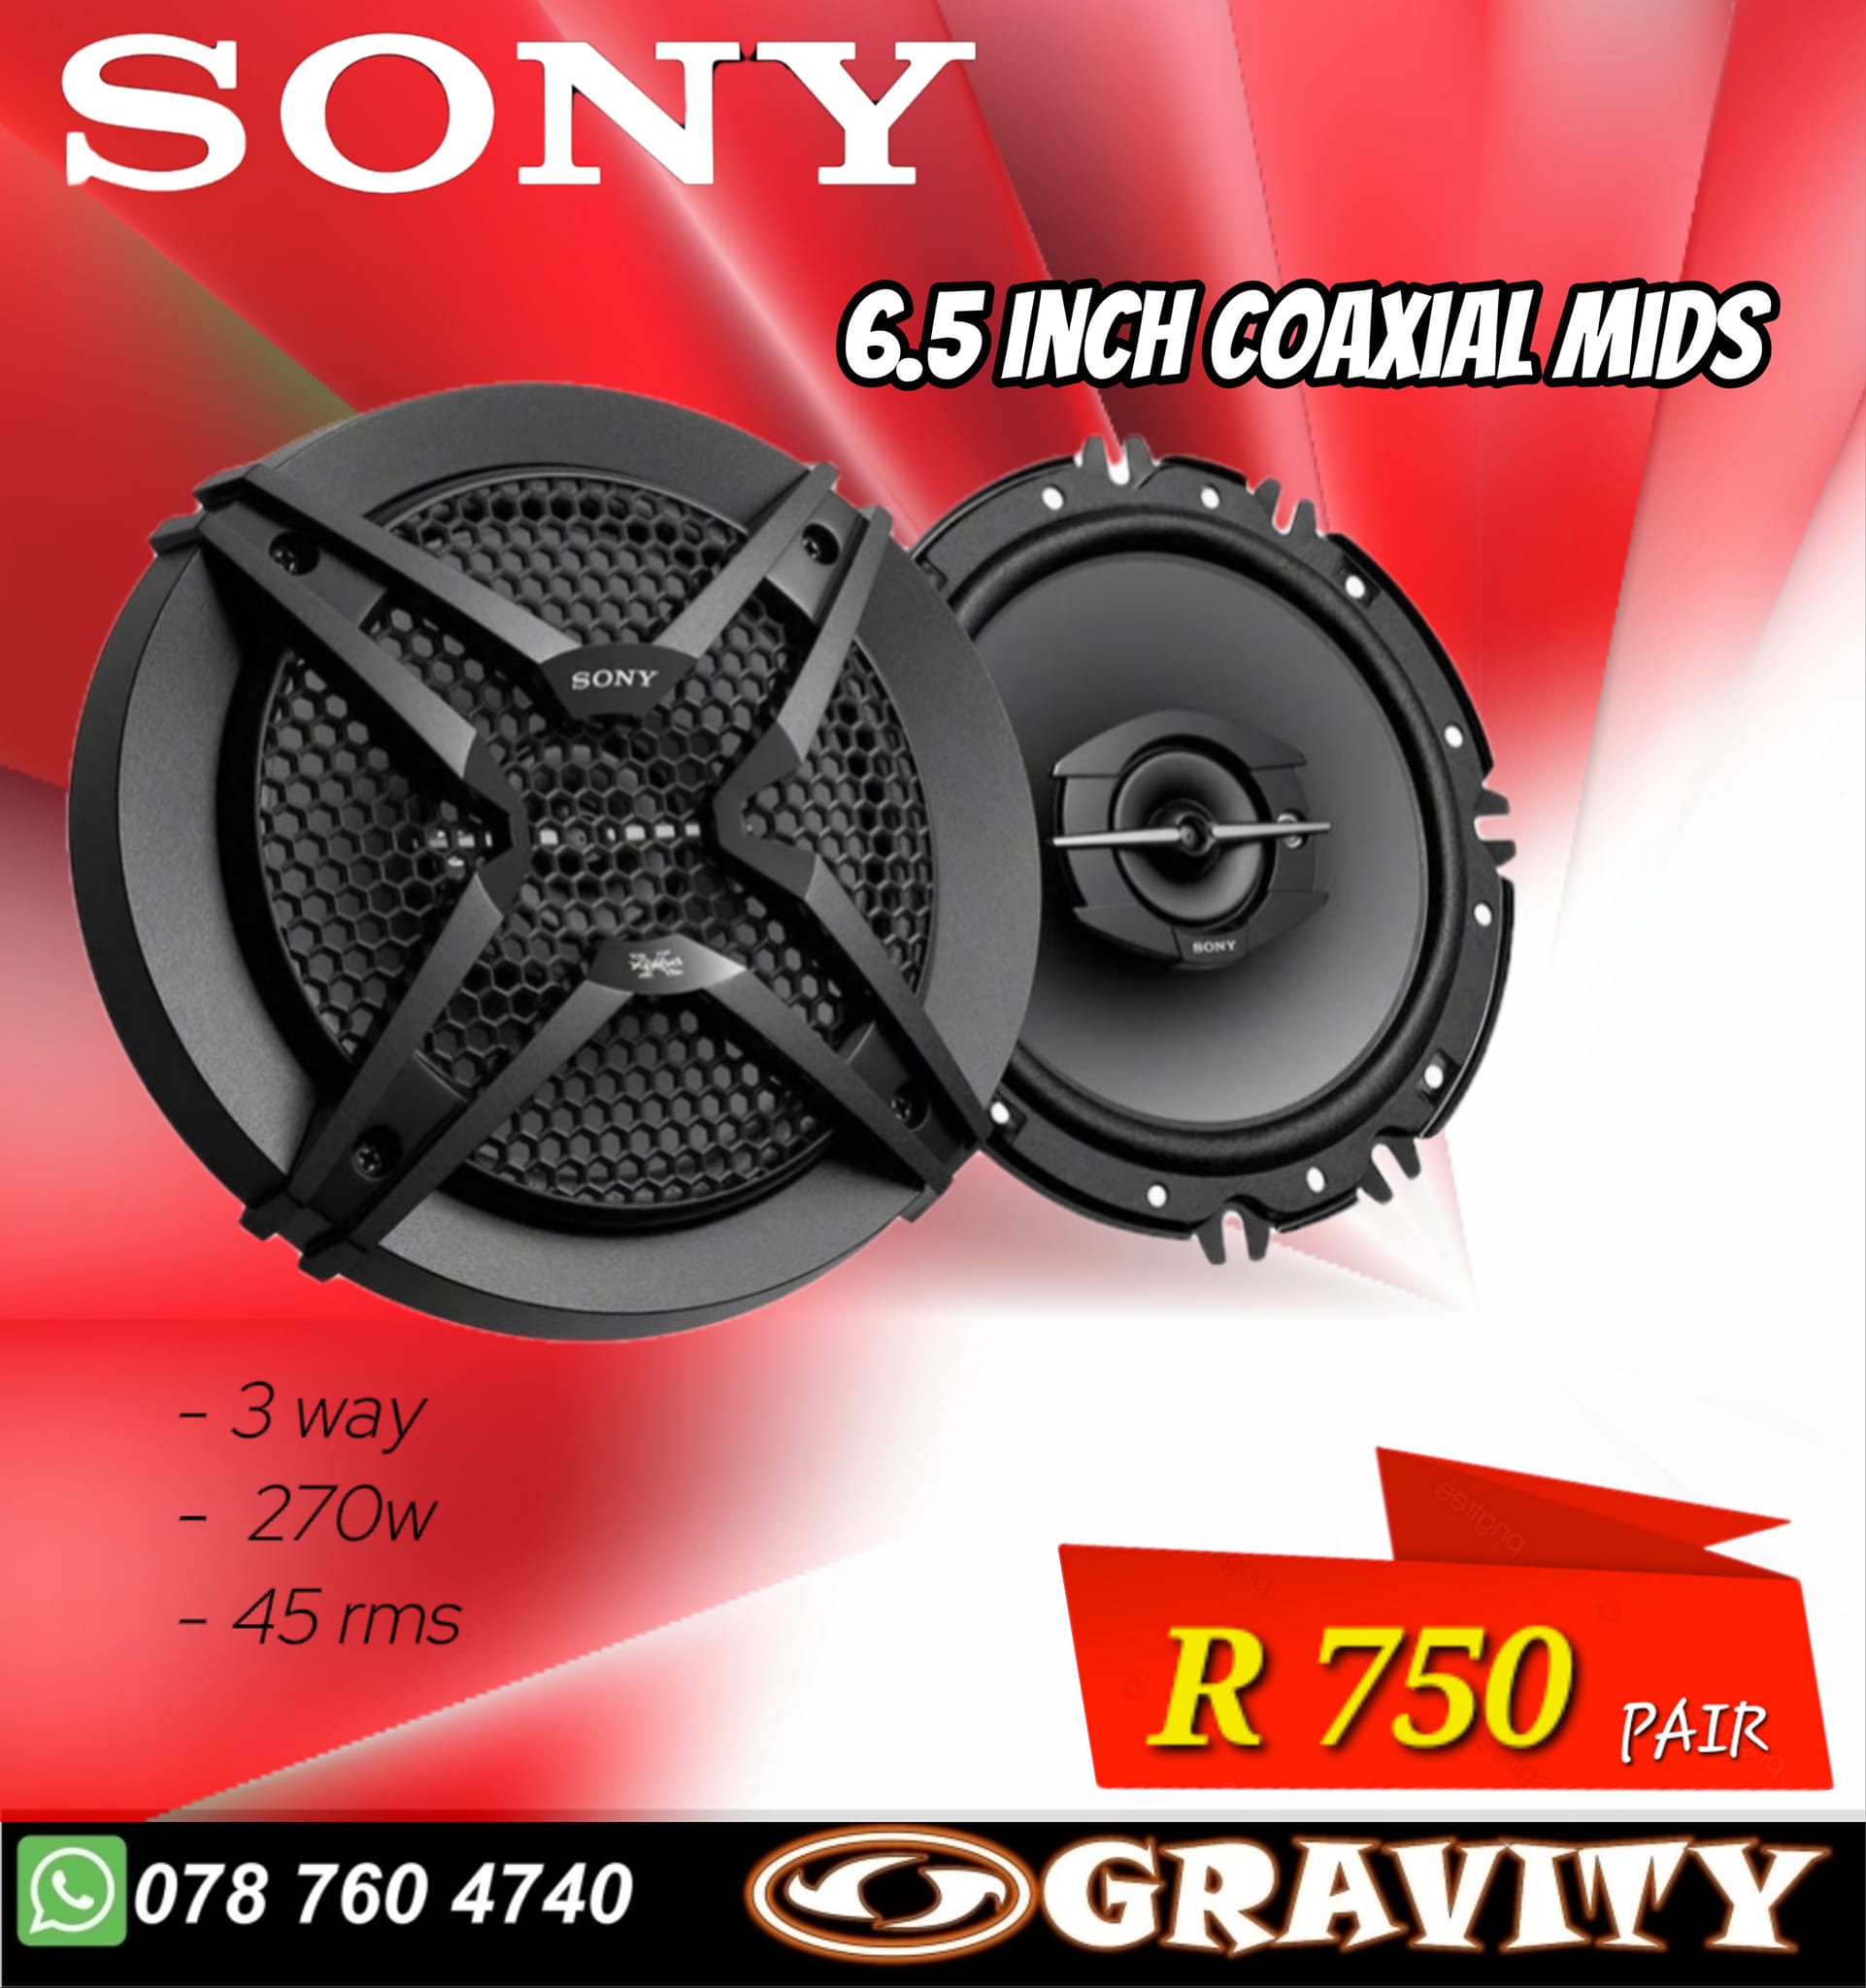 car audio combo , car audio equipment , sony , pioneer ,jvc , kicker , targa , xtc , jbl . starsound  | car audio durban | car audio fitment durban | dj sound durban | disco dj pa equipment durban | disco dj lighting durban | dj mixer durban | dj power amp durban | tv box durban | air mouse durban | behringer durban | gravity sound and lighting warehouse durban | dj smoke achine durban | dj smoke fluid durban | disco dj lighting durban | disco dj led lighting durban | disco dj lazer lighting durban | car amps durban | car decks durban | car bluetooth decks durban | car van double dins durban | car subs durban | starsound grey cones subwoofers durban | Car accessories durban | disco dj party combos durban | J EQUIPMENT | DISCO DJ LIGHTING | DJ/PA COMBO PACKAGES | MULITIMEDIA | MOBILE DISCO-DJ FOR HIRE  SOUND EQUIPMENT HIRE | PROJECTOR AND SCREEN FOR HIRE | ELECTRONIC REPAIR CENTRE  GHD HAIR IRON REPIARS-CLOUD NINE | PUBLIC ADDRESS SYSTEMS | PA DESK MIXERS  SANITIZER FOGGING MACHINES | POWER AMPLIFER | CROSSOVE car audio disco dj pa dj controllers mixer speakers tweeters equipment . DJ EQUIPMENT | DISCO DJ LIGHTING | DJ/PA COMBO PACKAGES | MULITIMEDIA | MOBILE DISCO-DJ FOR HIRE  SOUND EQUIPMENT HIRE | PROJECTOR AND SCREEN FOR HIRE | ELECTRONIC REPAIR CENTRE  GHD HAIR IRON REPIARS-CLOUD NINE | PUBLIC ADDRESS SYSTEMS | PA DESK MIXERS  SANITIZER FOGGING MACHINES | POWER AMPLIFER | CROSSOVER / EQUALIZER | DISCO / PA SPEAKERS  HOME THEATRE SYSTEMS | SANITIZER SMOKE MACHINE | DJ MIXERS | DJ ACCESSORIES  DJ CD / MP3 PLAYERS / MIDI CONTROLLERS | DISCO BOXES | MICROPHONES | CAR AUDIO | CAR AUDIO FITMENT  SANITIZER THERMAL FOGGER MACHINES | CAR ACCESSORIES | CAR SPEAKERS | CAR AMPLIFIERS | CAR SOUND FITMENT  MARINE AUDIO | DISCO EQUIPMENT FOR HIRE | DISCO LIGHTING COMBO FOR HIRE | CONFETTI CANON MACHINE FOR HIRE | BUBBLE  MACHINE FOR HIRE | SMOKE MACHINE FOR HIRE | SNOW MACHINE FOR HIRE | STAGE PLATFORM FOR HIRE | KARAOKE PARTY EQUIPMENT  HIRE | KARAOKE SOUND SYSTEM FOR HIRE | PA SPEAKERS FOR HIRE  car audio disco dj pa dj controllers mixer speakers tweeters equipment . DJ EQUIPMENT | DISCO DJ LIGHTING | DJ/PA COMBO PACKAGES | MULITIMEDIA | MOBILE DISCO-DJ FOR HIRE  SOUND EQUIPMENT HIRE | PROJECTOR AND SCREEN FOR HIRE | ELECTRONIC REPAIR CENTRE  GHD HAIR IRON REPIARS-CLOUD NINE | PUBLIC ADDRESS SYSTEMS | PA DESK MIXERS  SANITIZER FOGGING MACHINES | POWER AMPLIFER | CROSSOVER / EQUALIZER | DISCO / PA SPEAKERS  HOME THEATRE SYSTEMS | SANITIZER SMOKE MACHINE | DJ MIXERS | DJ ACCESSORIES  DJ CD / MP3 PLAYERS / MIDI CONTROLLERS | DISCO BOXES | MICROPHONES | CAR AUDIO | CAR AUDIO FITMENT  SANITIZER THERMAL FOGGER MACHINES | CAR ACCESSORIES | CAR SPEAKERS | CAR AMPLIFIERS | CAR SOUND FITMENT  MARINE AUDIO | DISCO EQUIPMENT FOR HIRE | DISCO LIGHTING COMBO FOR HIRE | CONFETTI CANON MACHINE FOR HIRE | BUBBLE  MACHINE FOR HIRE | SMOKE MACHINE FOR HIRE | SNOW MACHINE FOR HIRE | STAGE PLATFORM FOR HIRE | KARAOKE PARTY EQUIPMENT  HIRE | KARAOKE SOUND SYSTEM FOR HIRE | PA SPEAKERS FOR HIRE car audio combo , car audio  car audio disco dj pa dj controllers mixer speakers tweeters equipment . DJ EQUIPMENT | DISCO DJ LIGHTING | DJ/PA COMBO PACKAGES | MULITIMEDIA | MOBILE DISCO-DJ FOR HIRE  SOUND EQUIPMENT HIRE | PROJECTOR AND SCREEN FOR HIRE | ELECTRONIC REPAIR CENTRE  GHD HAIR IRON REPIARS-CLOUD NINE | PUBLIC ADDRESS SYSTEMS | PA DESK MIXERS  SANITIZER FOGGING MACHINES | POWER AMPLIFER | CROSSOVER / EQUALIZER | DISCO / PA SPEAKERS  HOME THEATRE SYSTEMS | SANITIZER SMOKE MACHINE | DJ MIXERS | DJ ACCESSORIES  DJ CD / MP3 PLAYERS / MIDI CONTROLLERS | DISCO BOXES | MICROPHONES | CAR AUDIO | CAR AUDIO FITMENT  SANITIZER THERMAL FOGGER MACHINES | CAR ACCESSORIES | CAR SPEAKERS | CAR AMPLIFIERS | CAR SOUND FITMENT  MARINE AUDIO | DISCO EQUIPMENT FOR HIRE | DISCO LIGHTING COMBO FOR HIRE | CONFETTI CANON MACHINE FOR HIRE | BUBBLE  MACHINE FOR HIRE | SMOKE MACHINE FOR HIRE | SNOW MACHINE FOR HIRE | STAGE PLATFORM FOR HIRE | KARAOKE PARTY EQUIPMENT  HIRE | KARAOKE SOUND SYSTEM FOR HIRE | PA SPEAKERS FOR HIRE  pioneer dj , pioneer dj controllers , pioneer cdj , pioneer ddj controllers , pioneer xdj-xz , pioneer ddj-400 , pioneer ddj-flx6 , pioneer ddj-200 , pioneer ddj-rev1 , pioneer ddj-rev7 , pioneer ddj-800